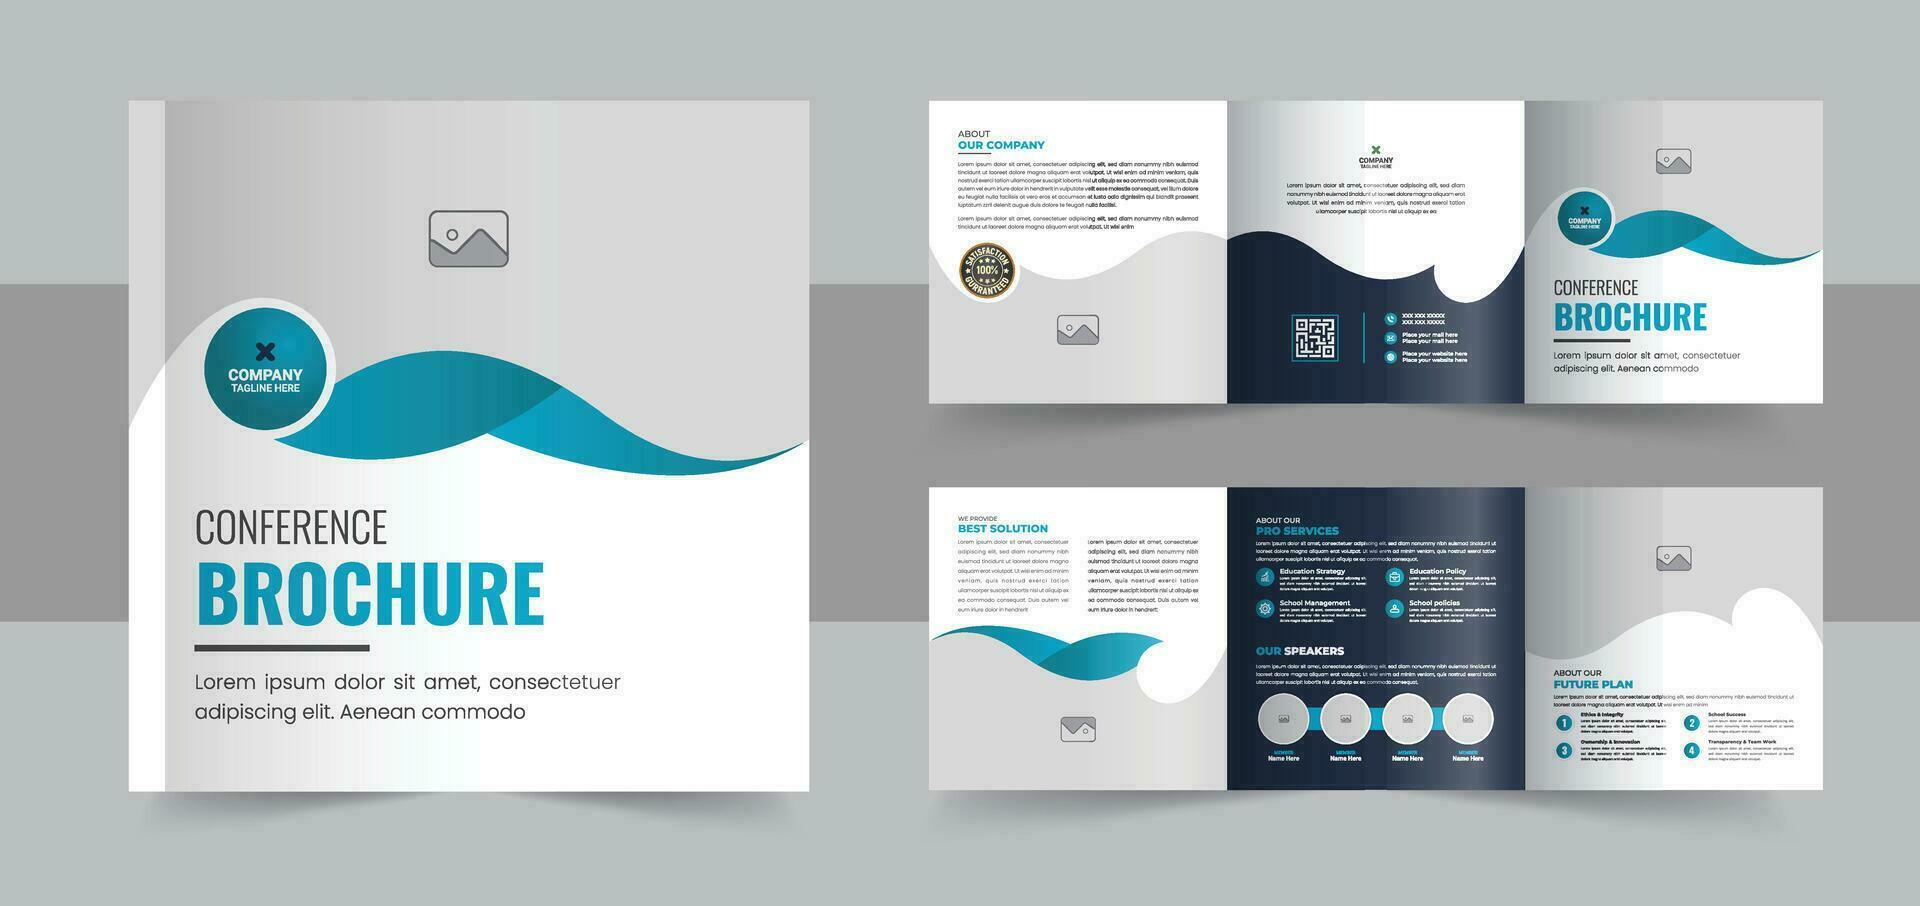 Creative conference square trifold brochure template, corporate square trifold brochure template or modern business trifold brochure design vector